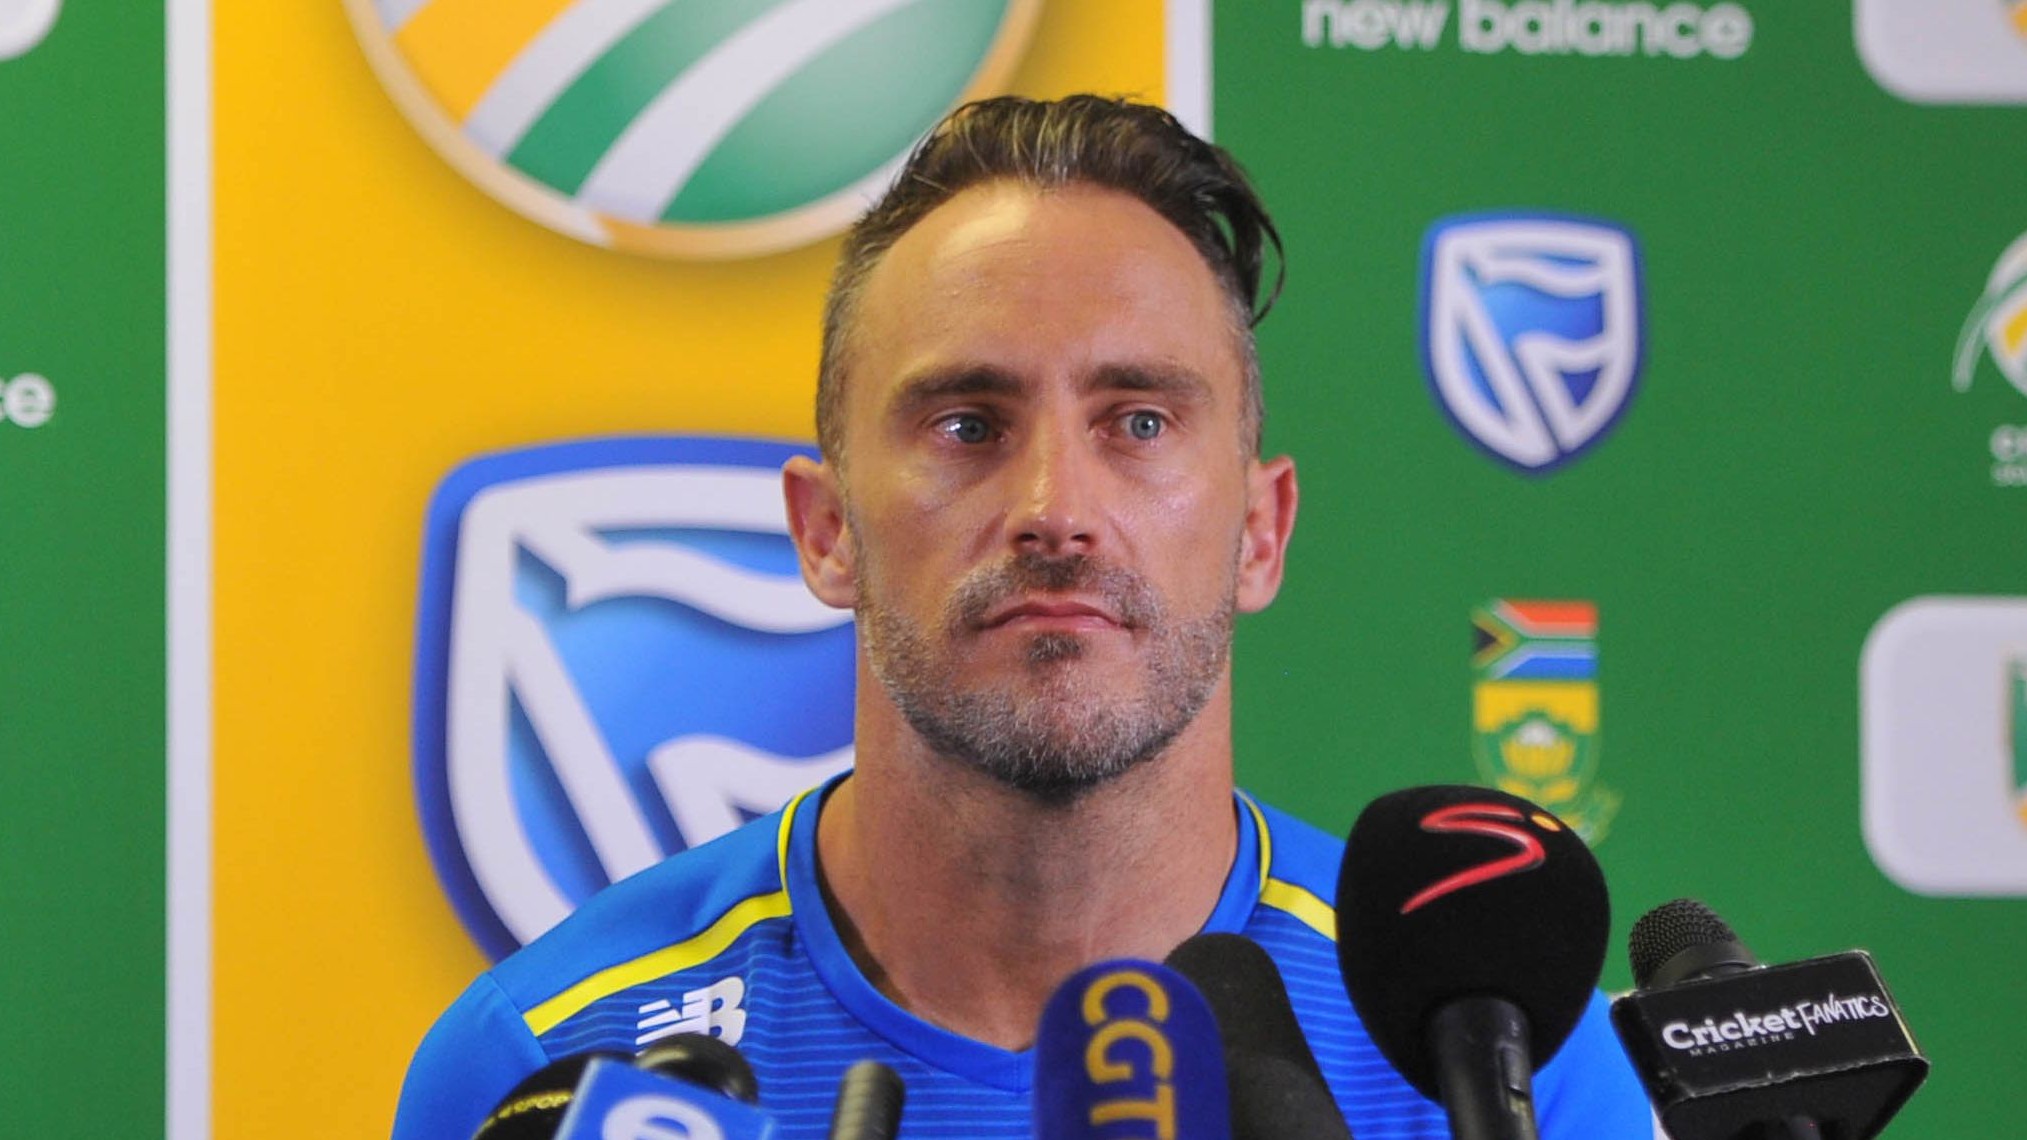 Faf du Plessis suggests dual isolation periods for T20 World Cup 2020 amid COVID-19 crisis